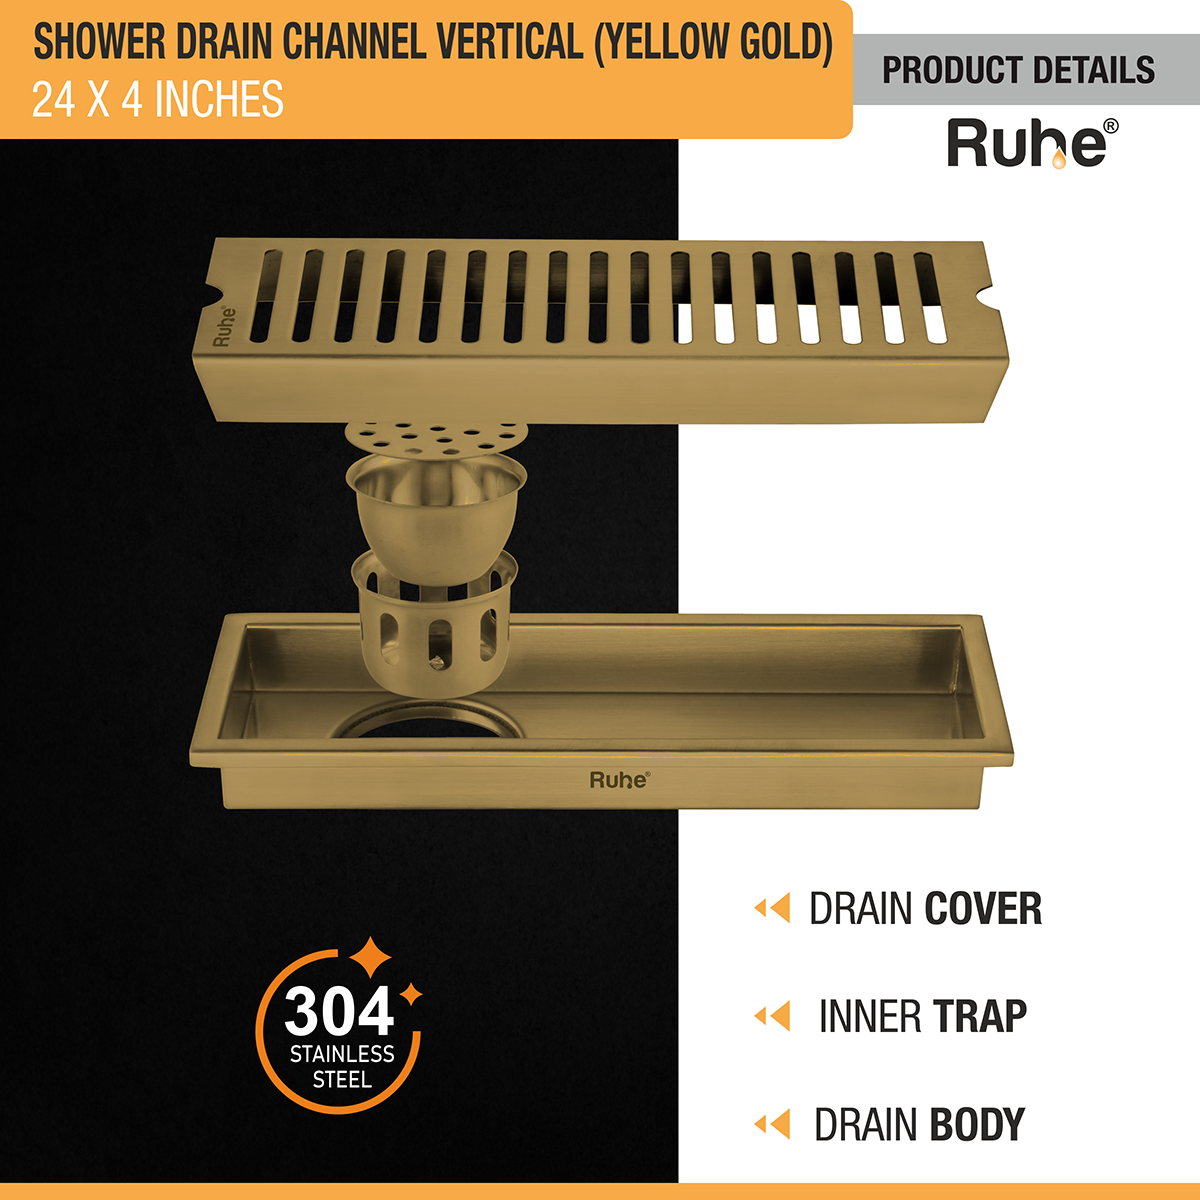 Vertical Shower Drain Channel (24 x 4 Inches) YELLOW GOLD product details